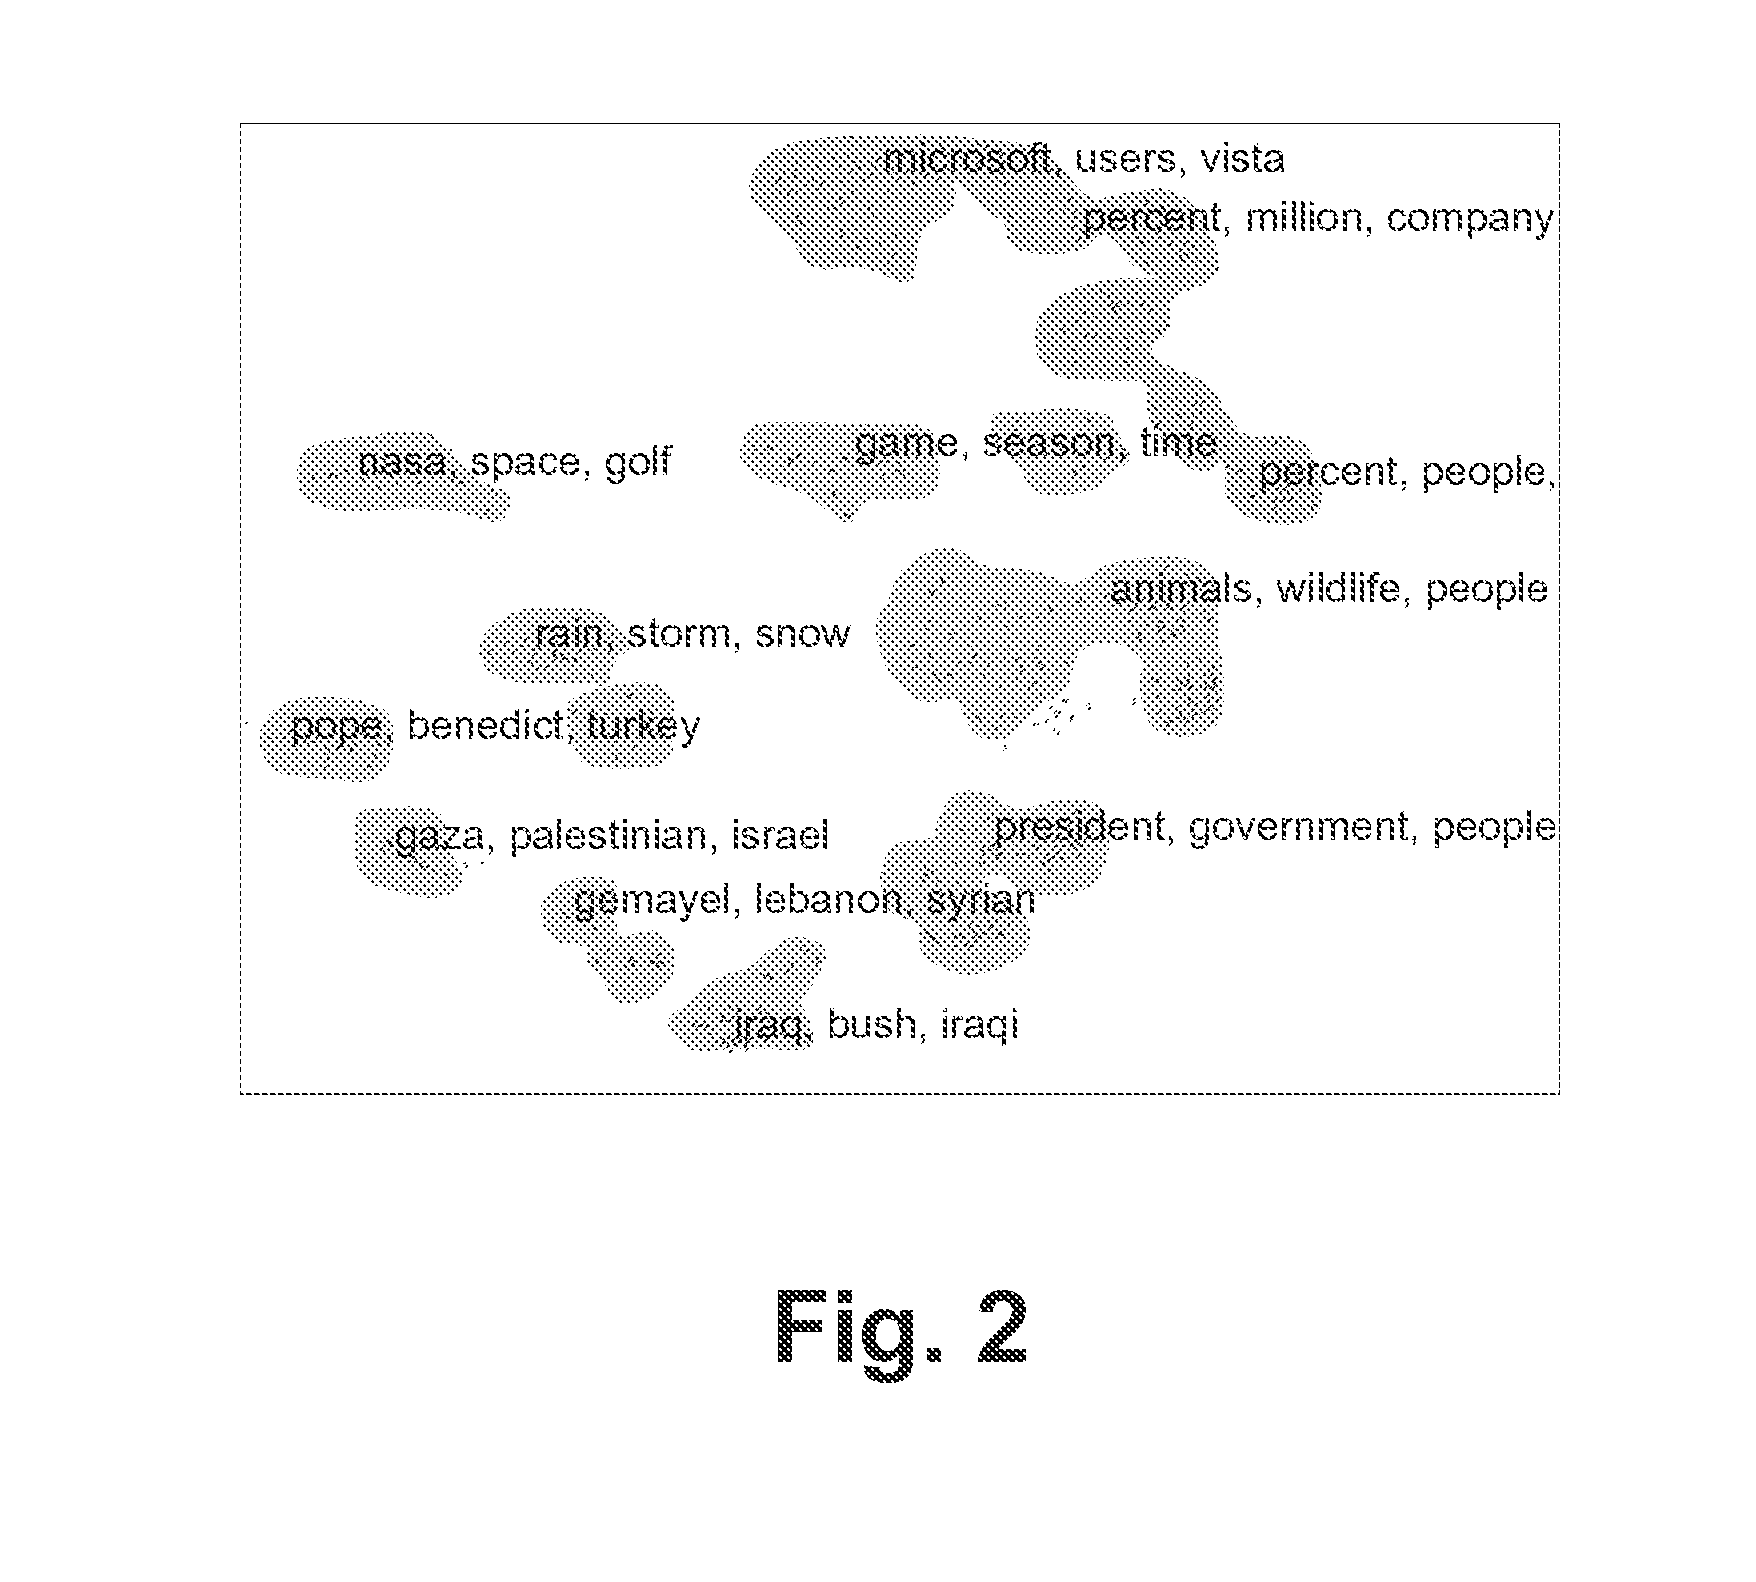 Method and system for information retrieval and aggregation from inferred user reasoning